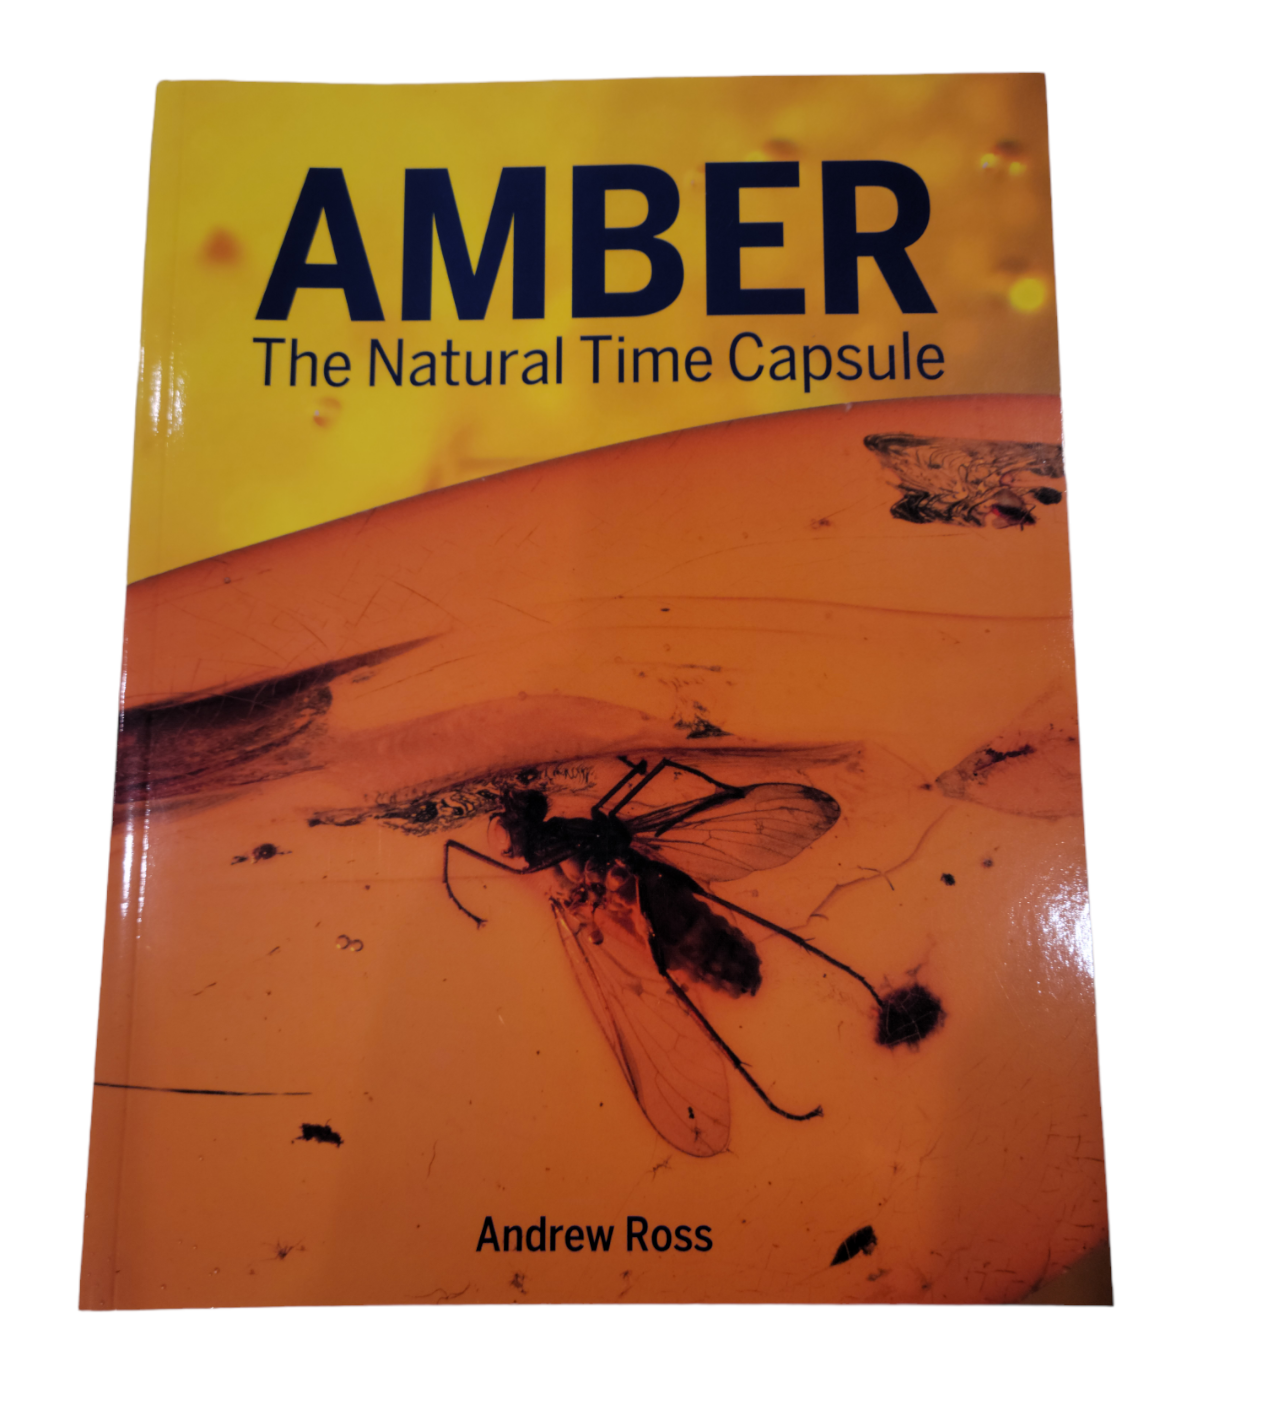 Amber the Natural Time Capsule